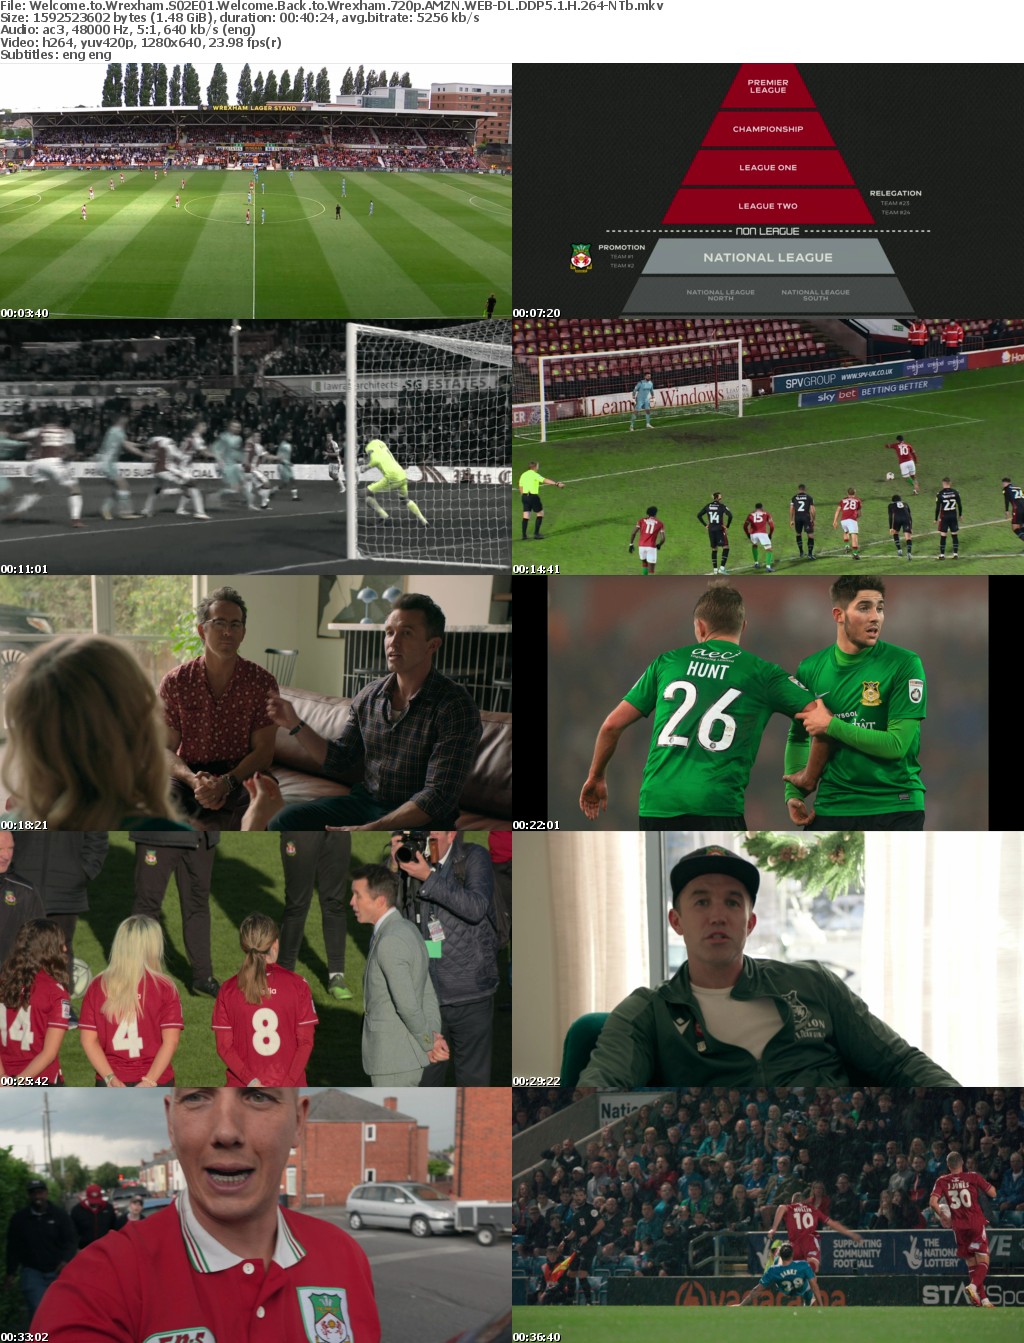 Welcome to Wrexham S02E01 Welcome Back to Wrexham 720p AMZN WEB-DL DDP5 1 H 264-NTb